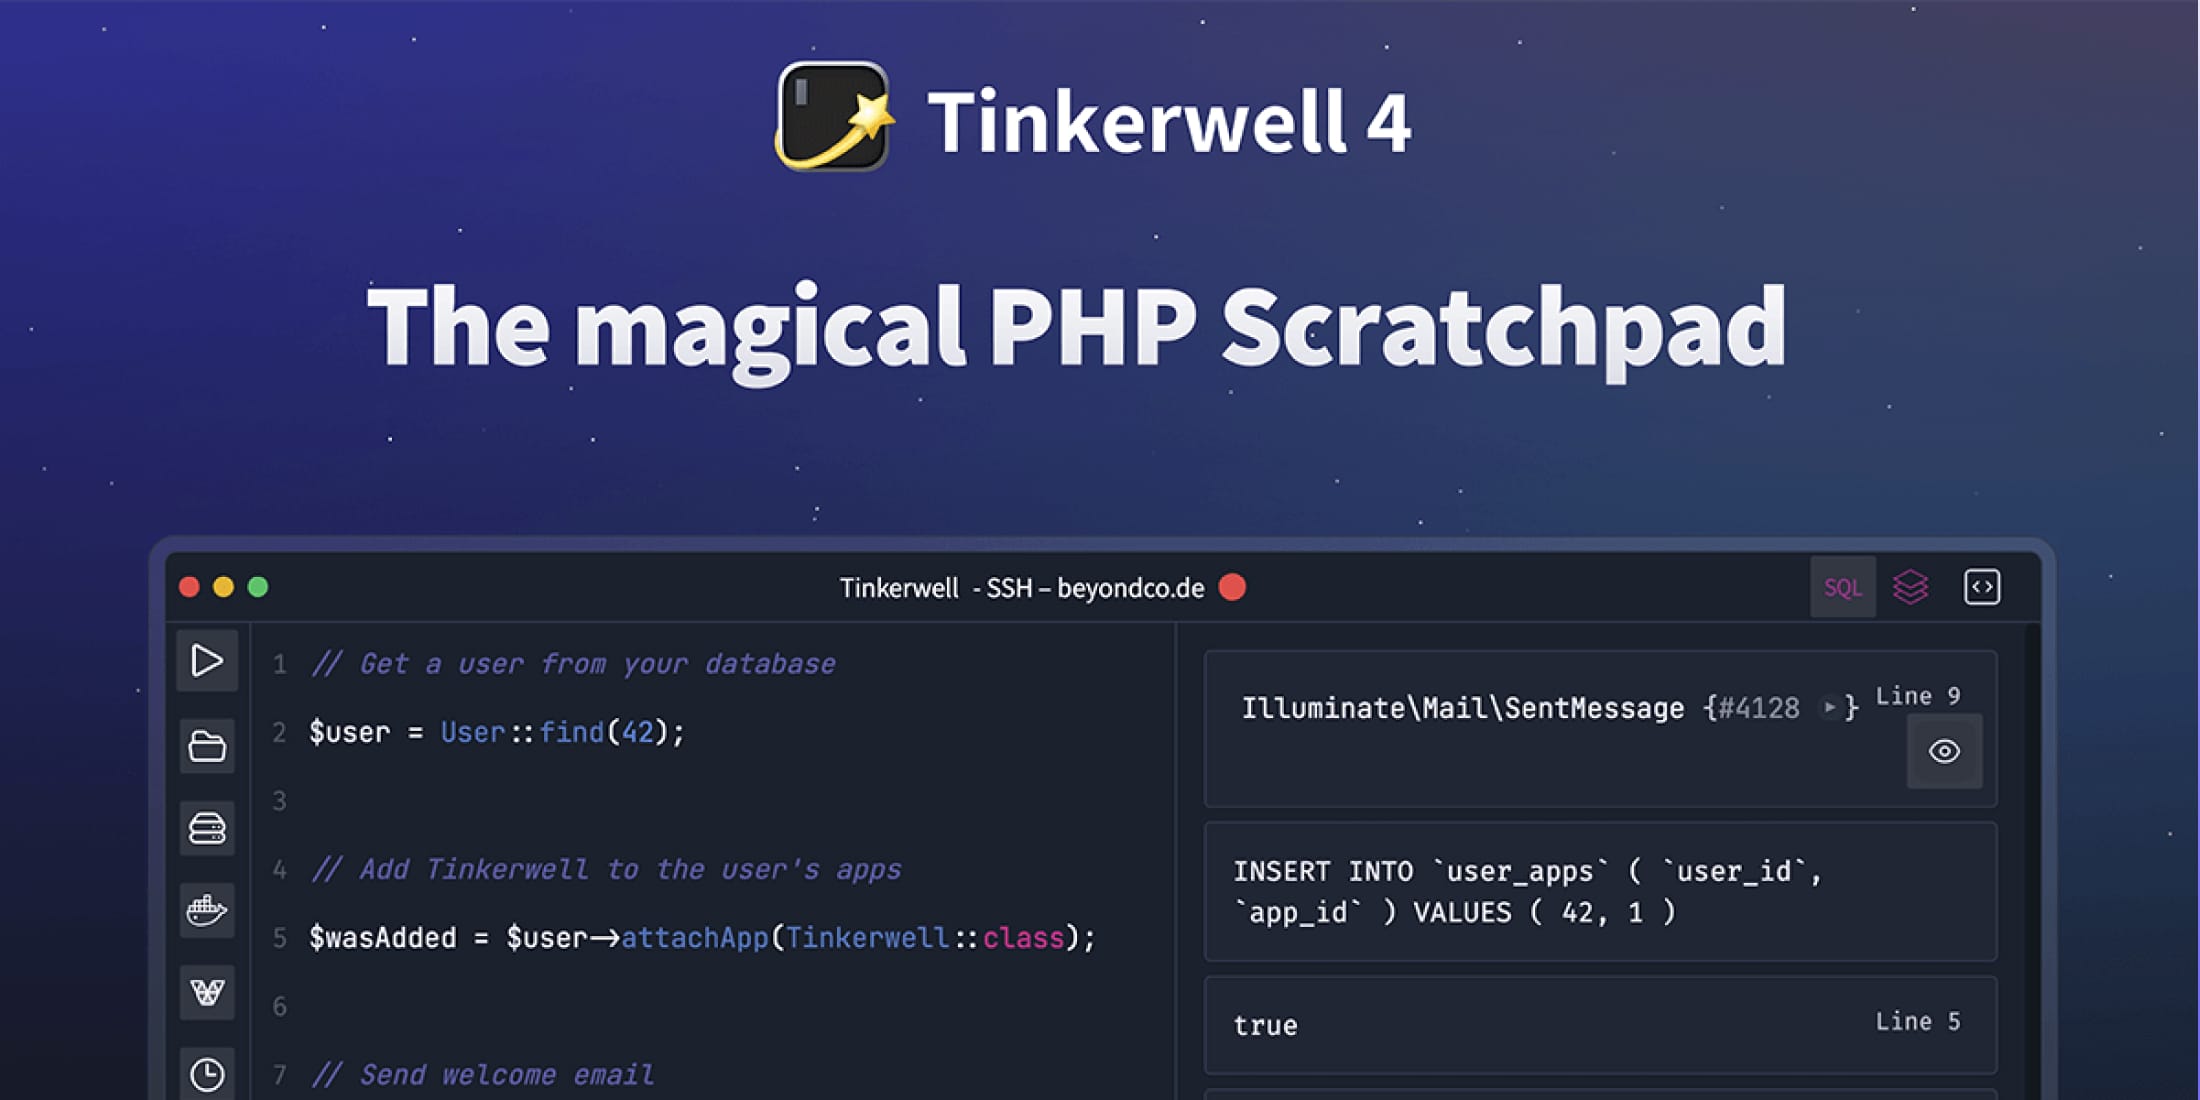 Tinkerwell v4 is now released